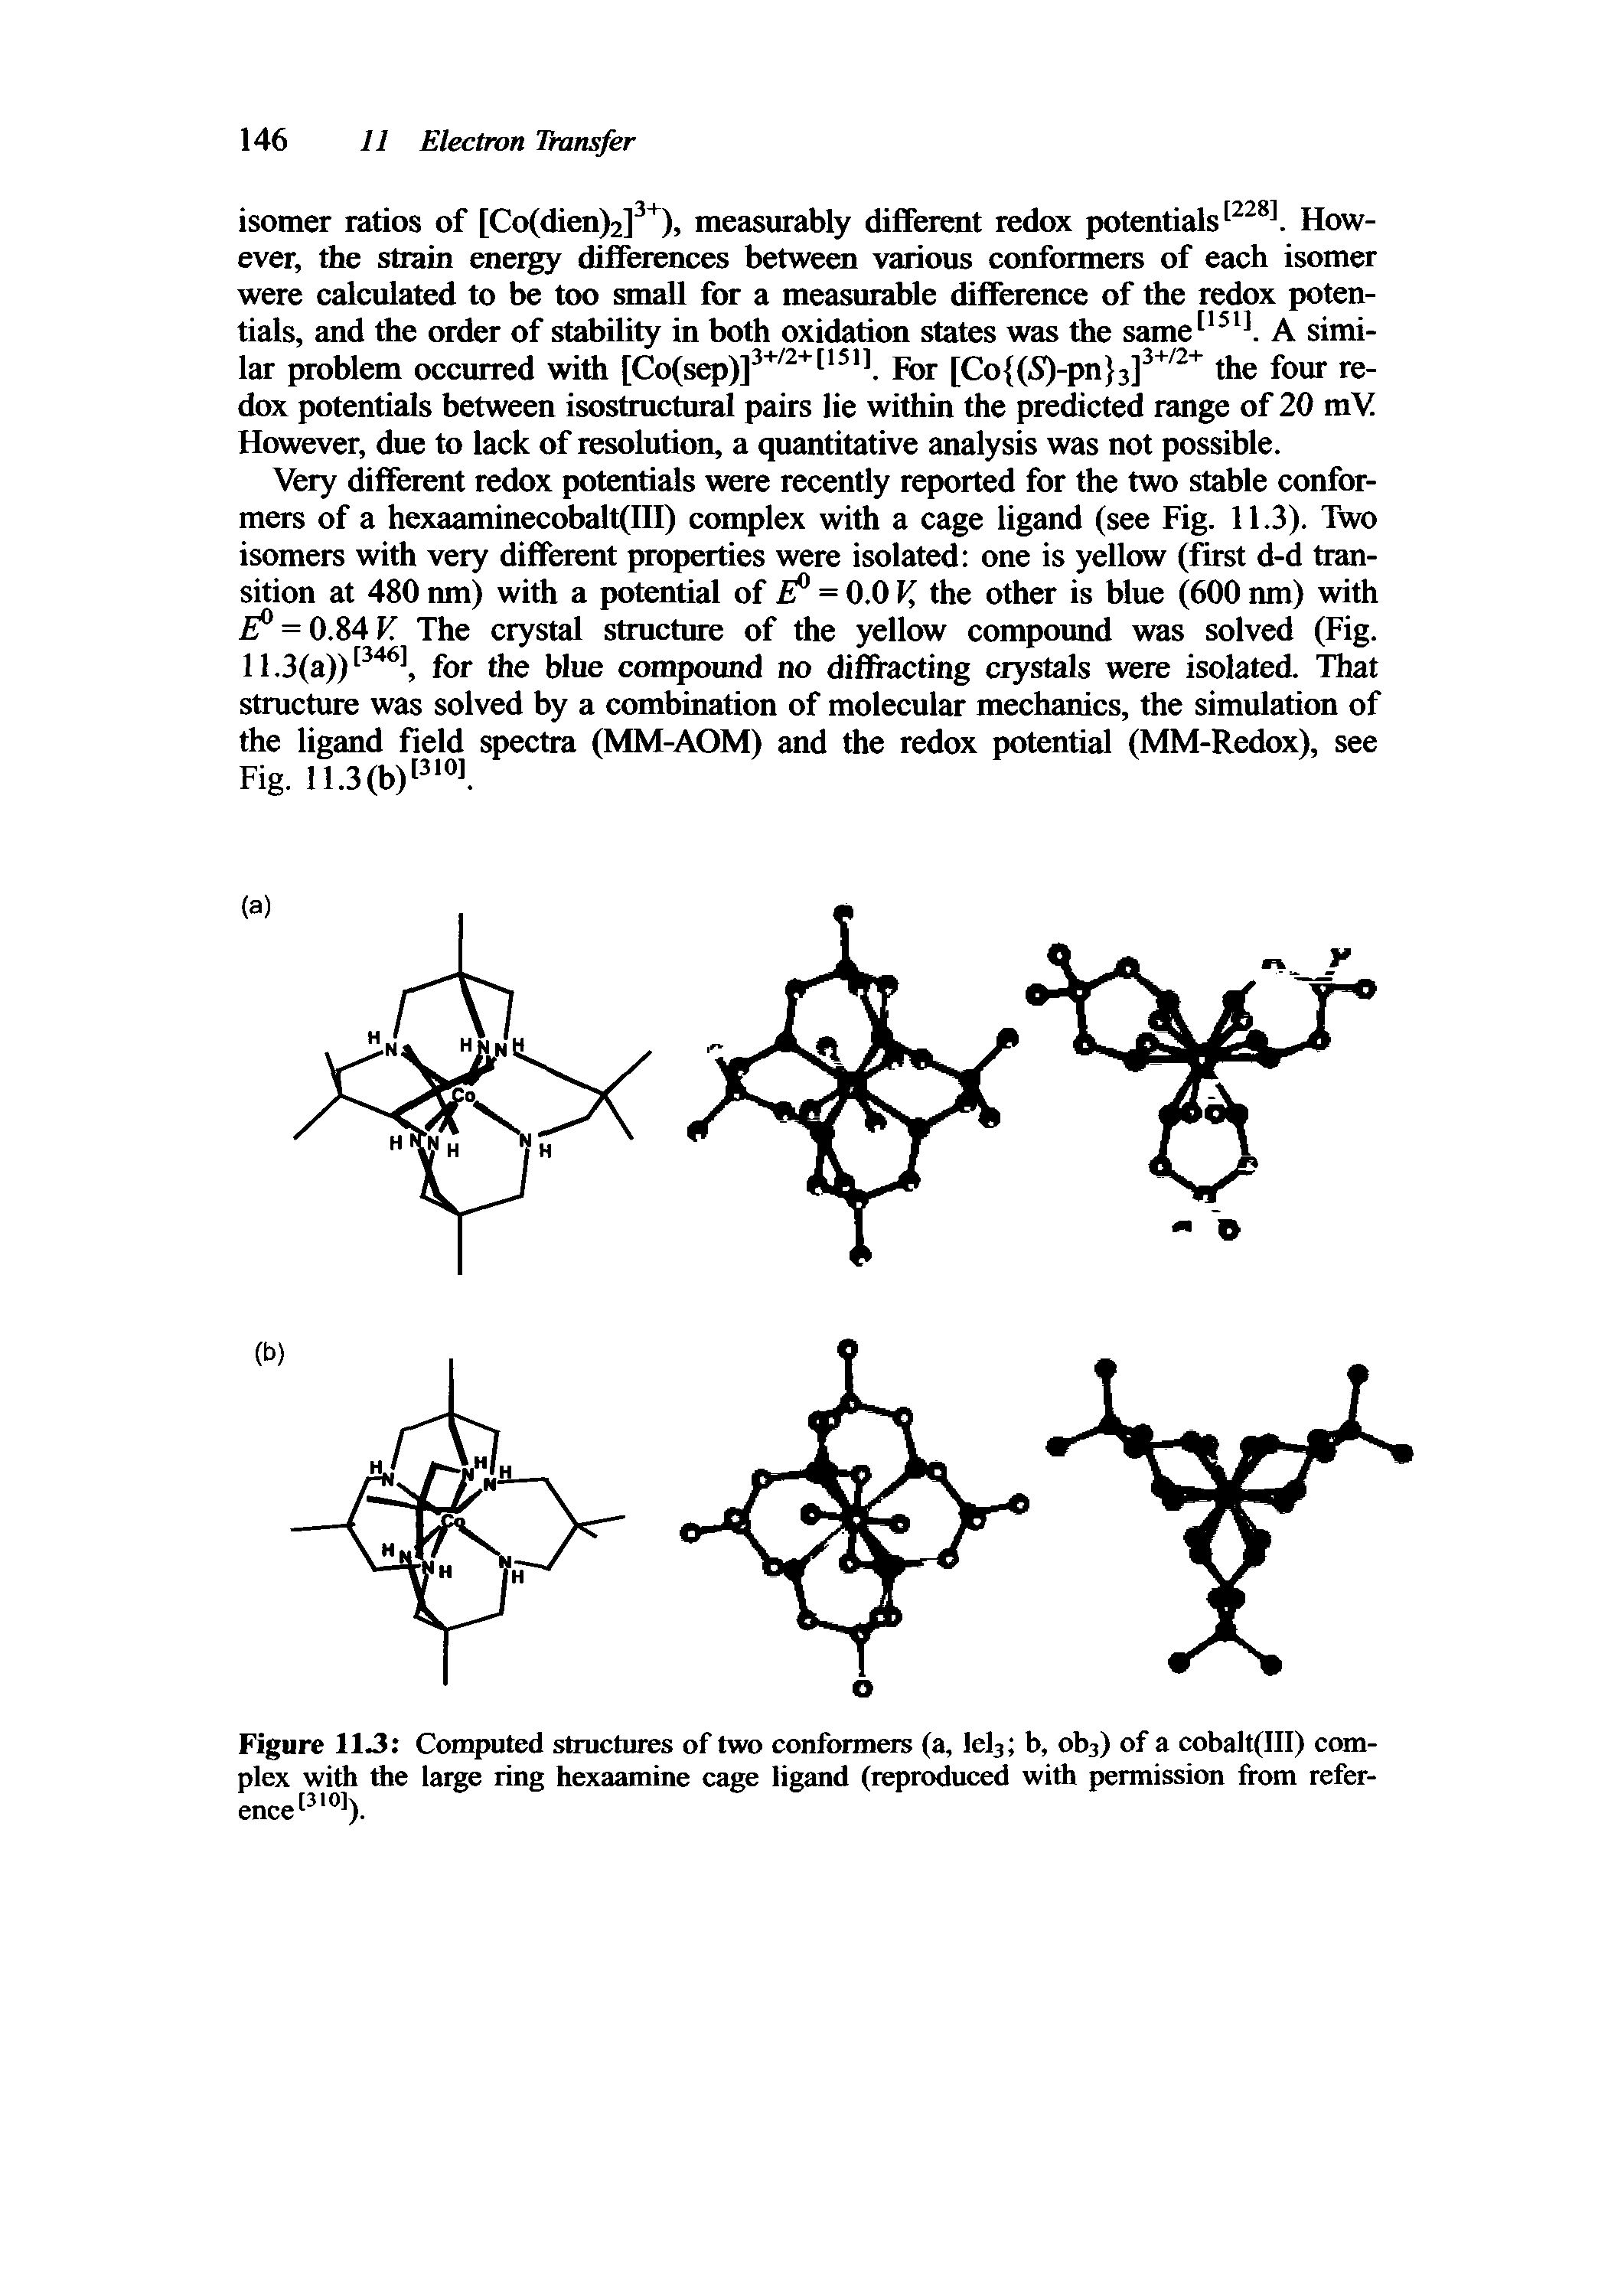 Figure 113 Computed structures of two conformers (a, lel3 b, ob3) of a cobalt(III) complex with the large ring hexaamine cage ligand (reproduced with permission from reference13101).